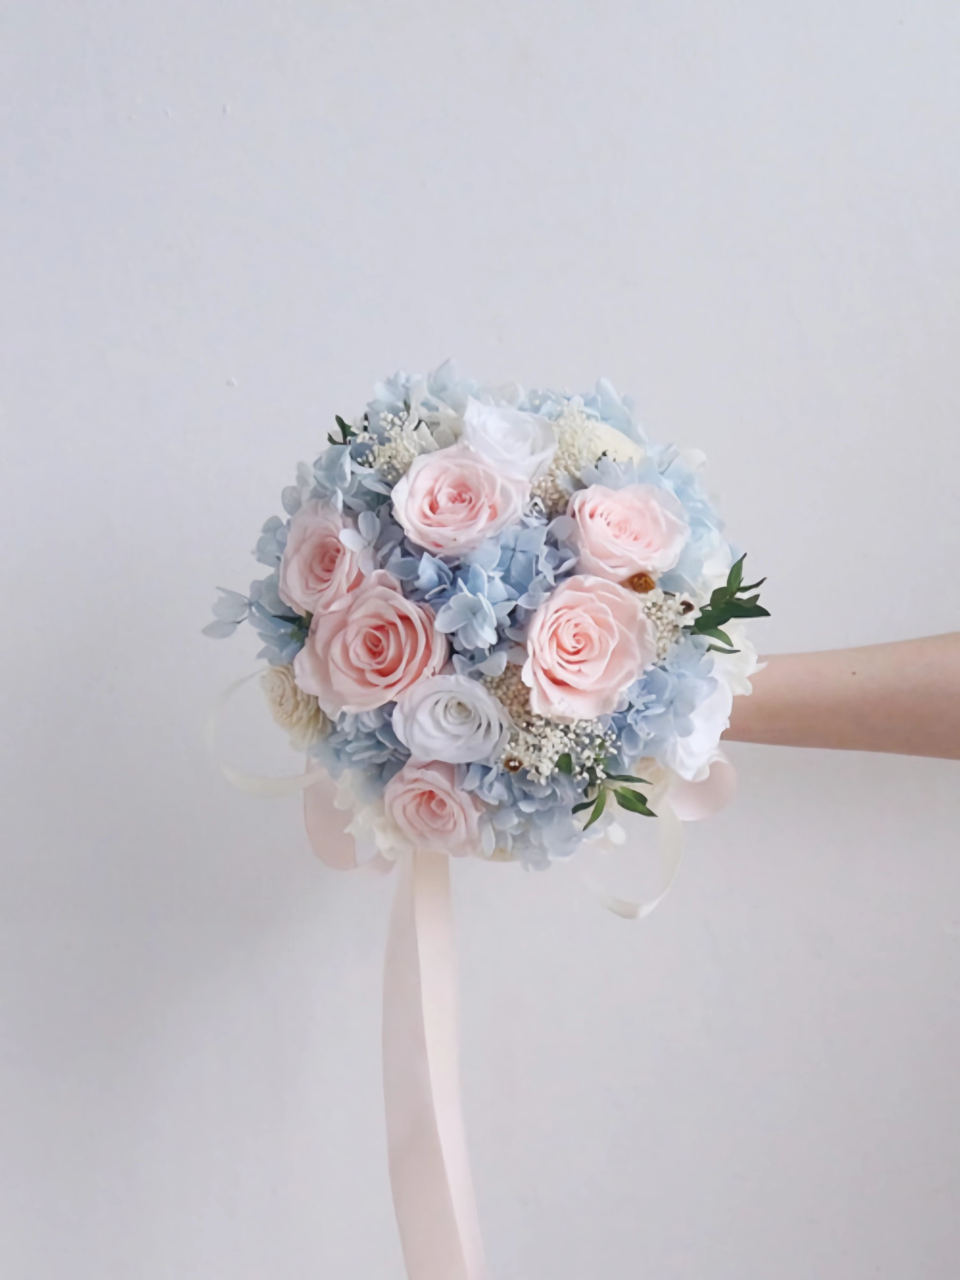 Blushing Bliss Bridal Bouquet - Made From Preserved Roses